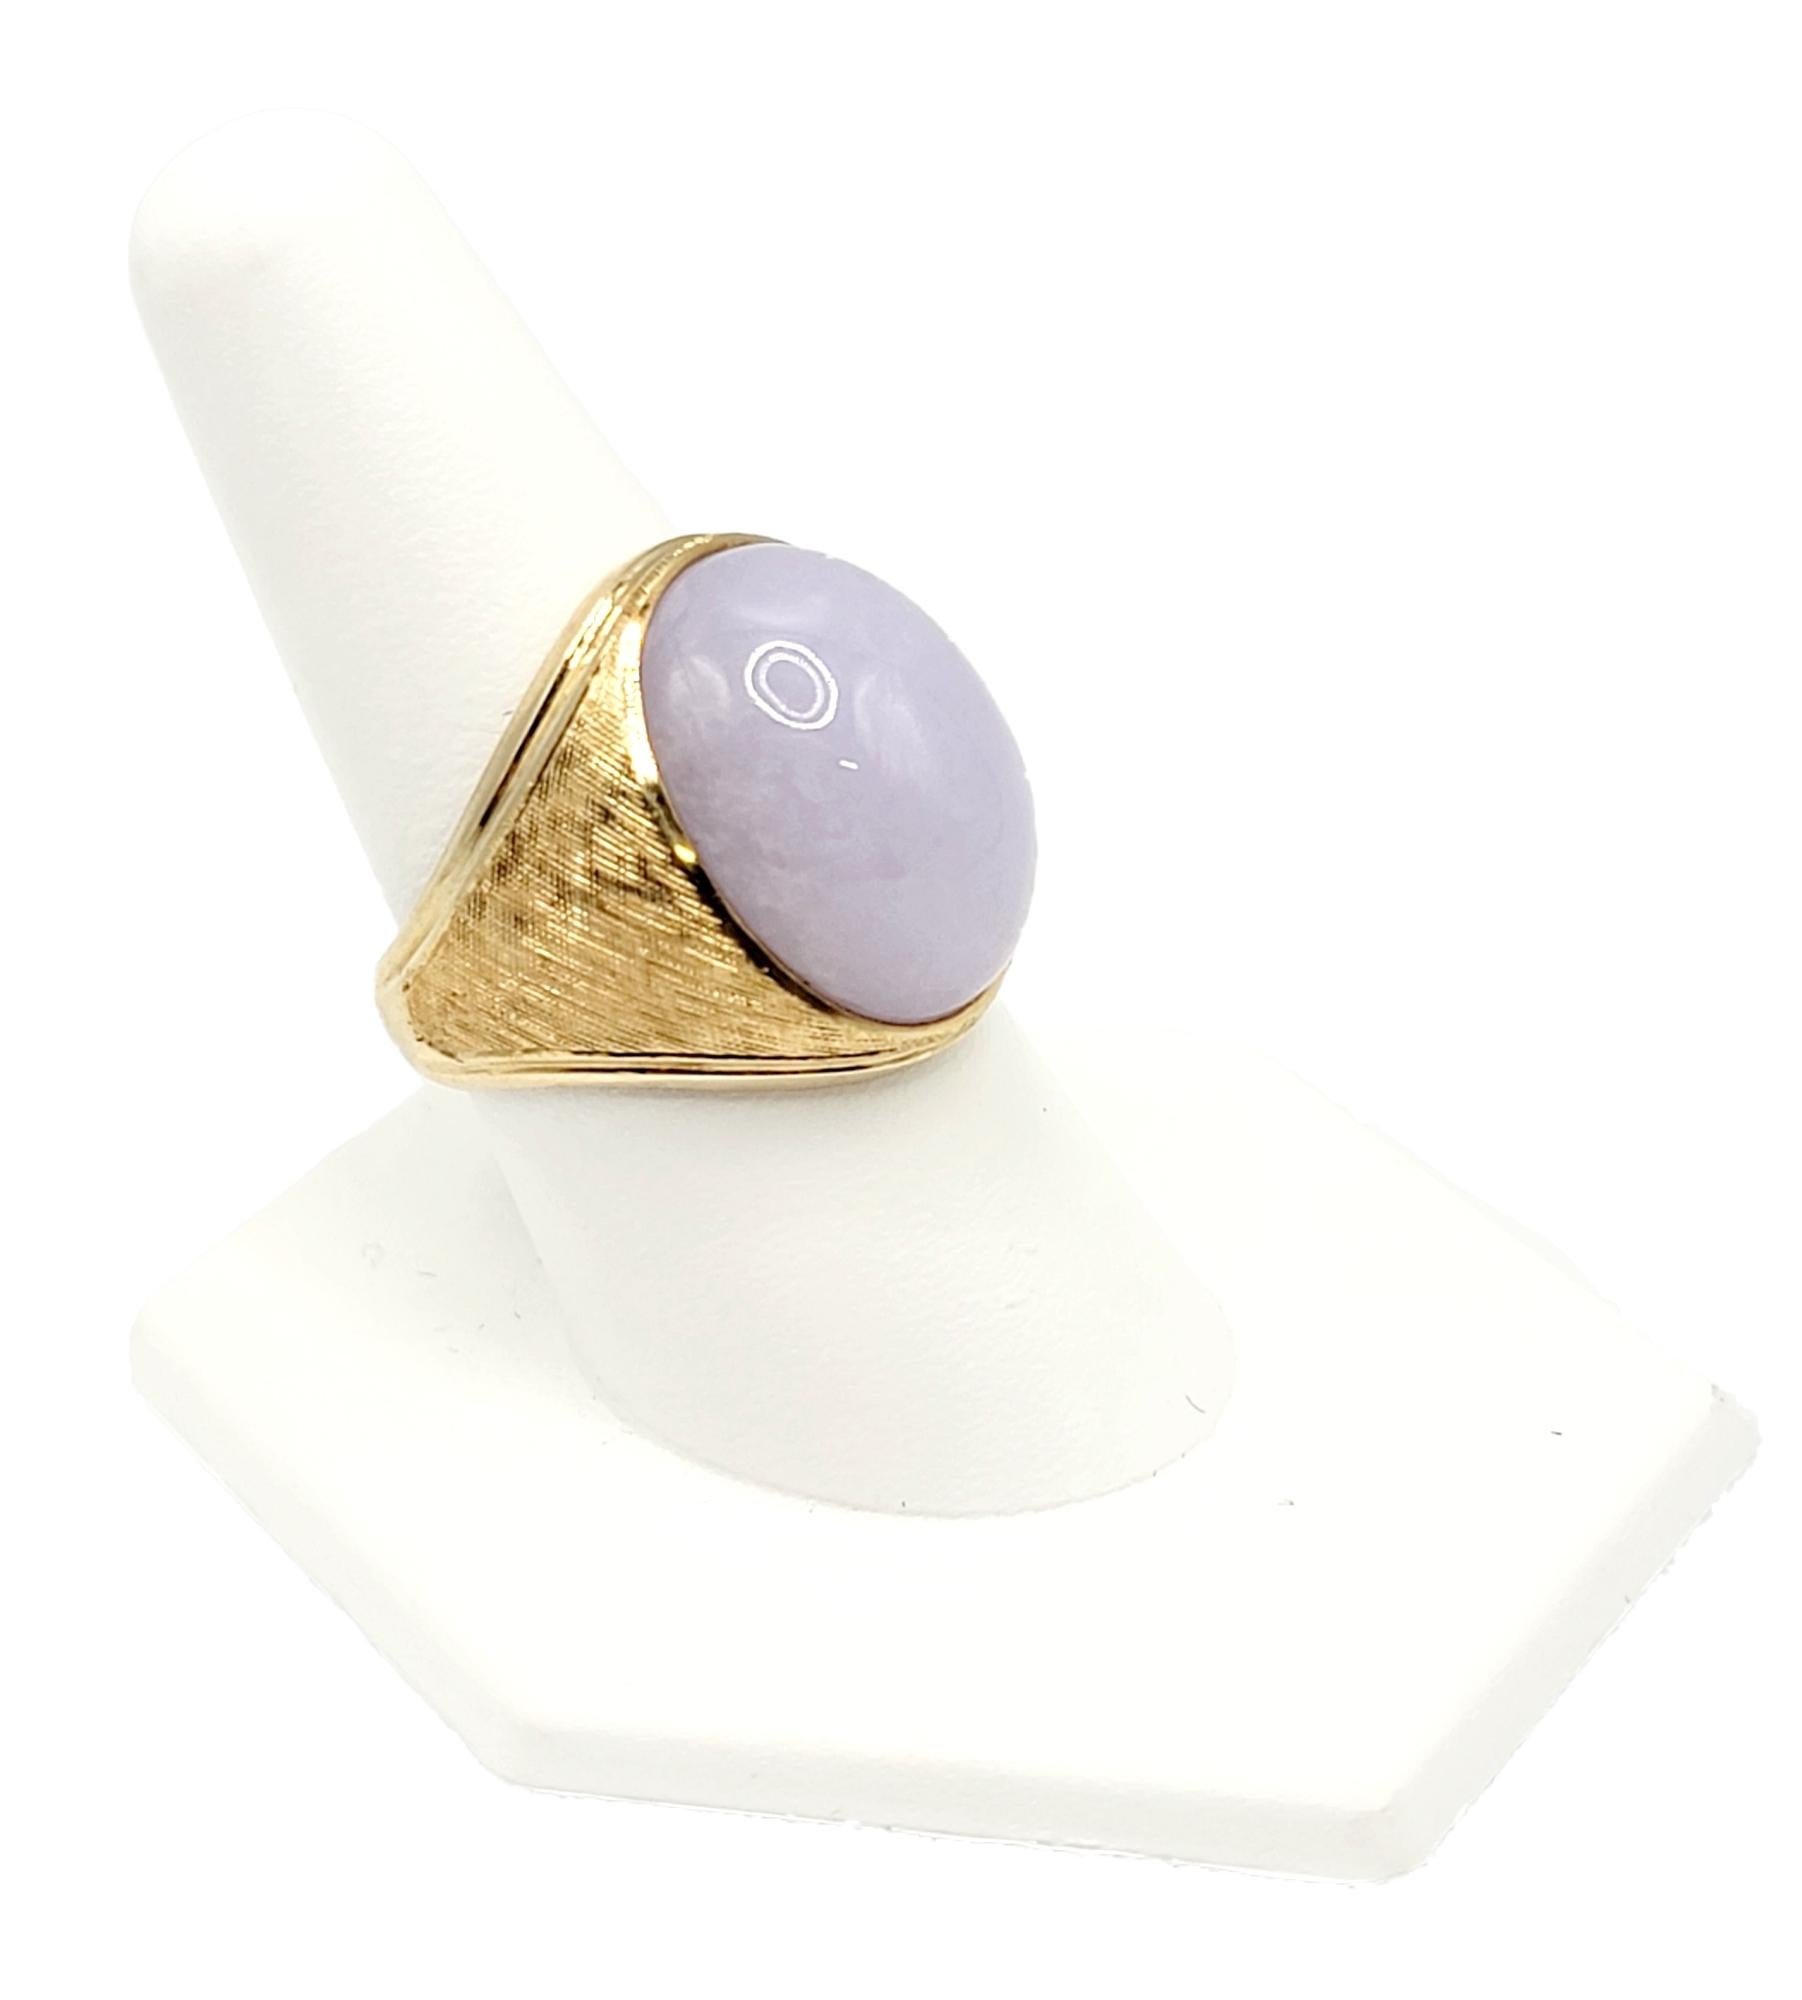 Solitaire Oval Cabochon Lavender Jadeite Jade Ring 14 Karat Yellow Gold In Good Condition For Sale In Scottsdale, AZ